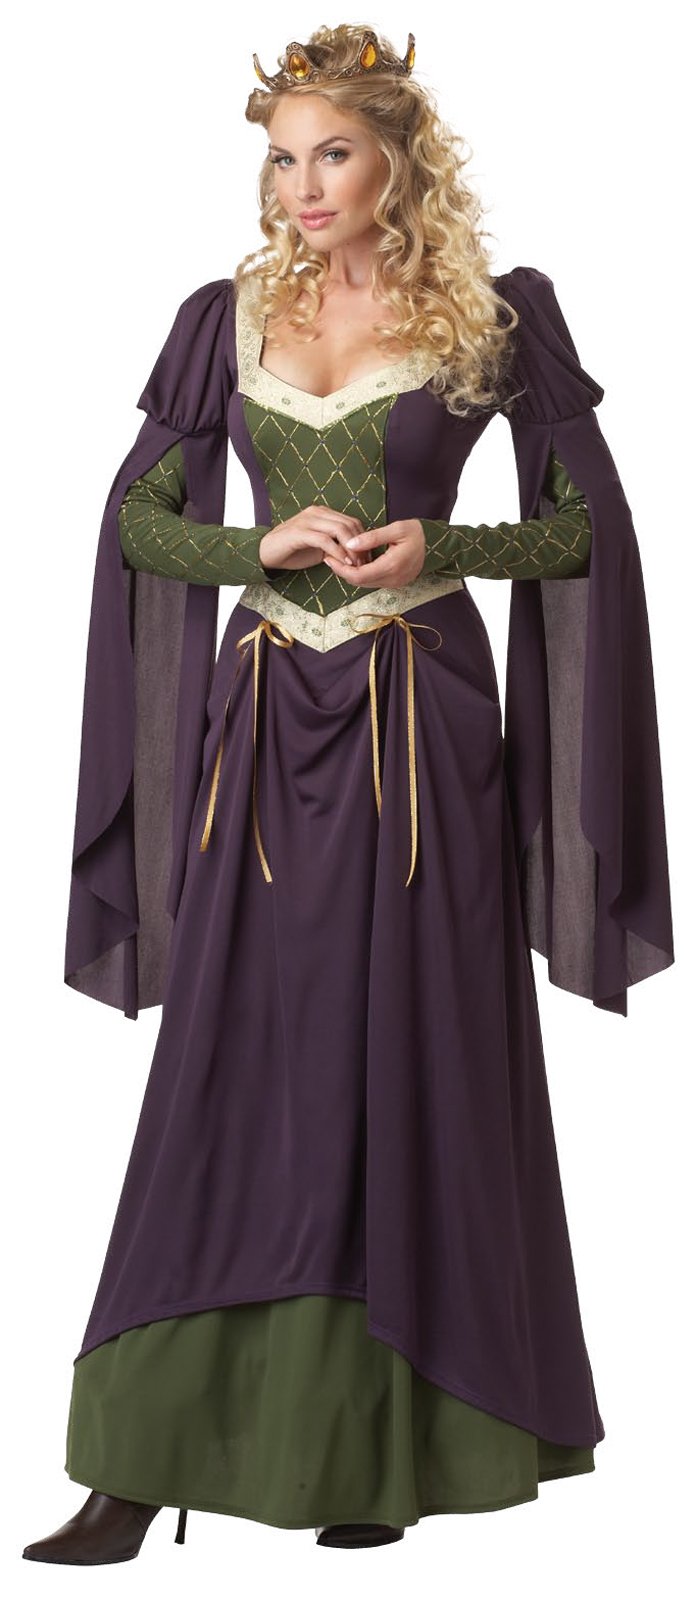 Lady in Waiting Adult Costume